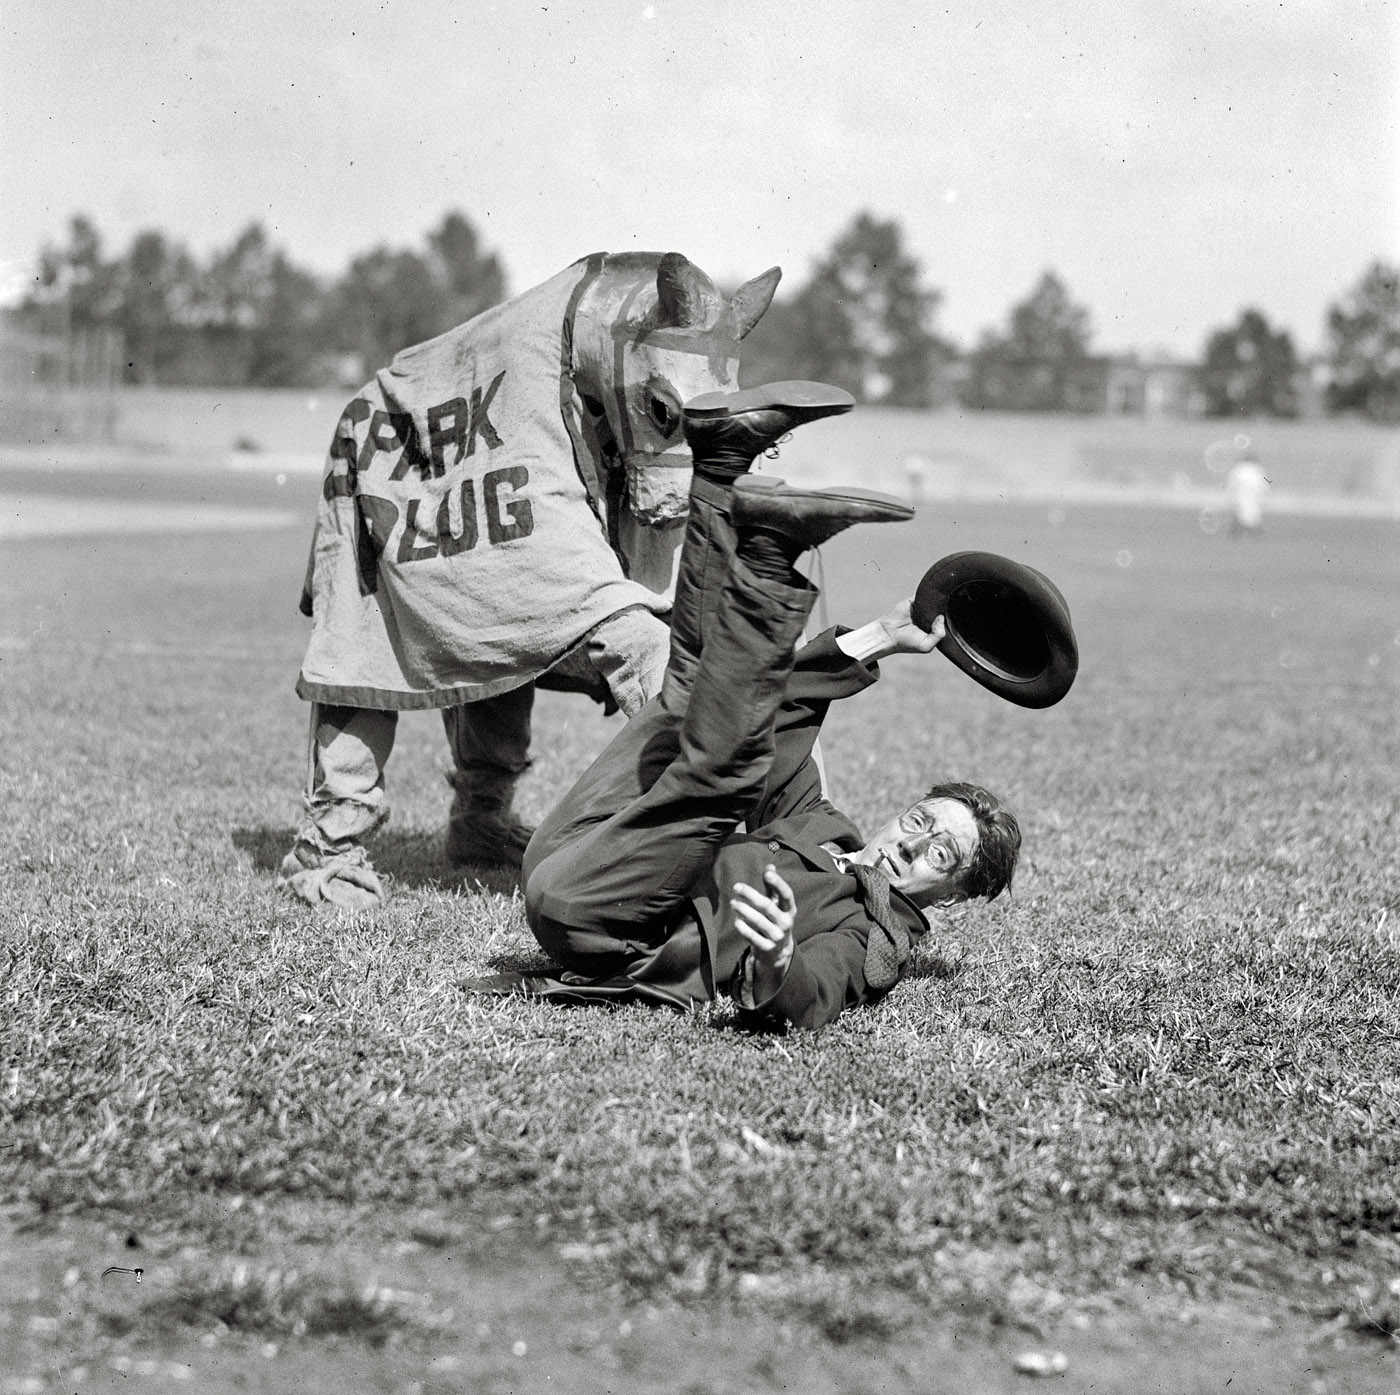 September 3, 1923. "Police and Firemen's ballgame." At Griffith Stadium in Washington, D.C., Barney and Spark Plug from the popular comic strip "Barney Google." National Photo Company Collection glass negative. View full size.